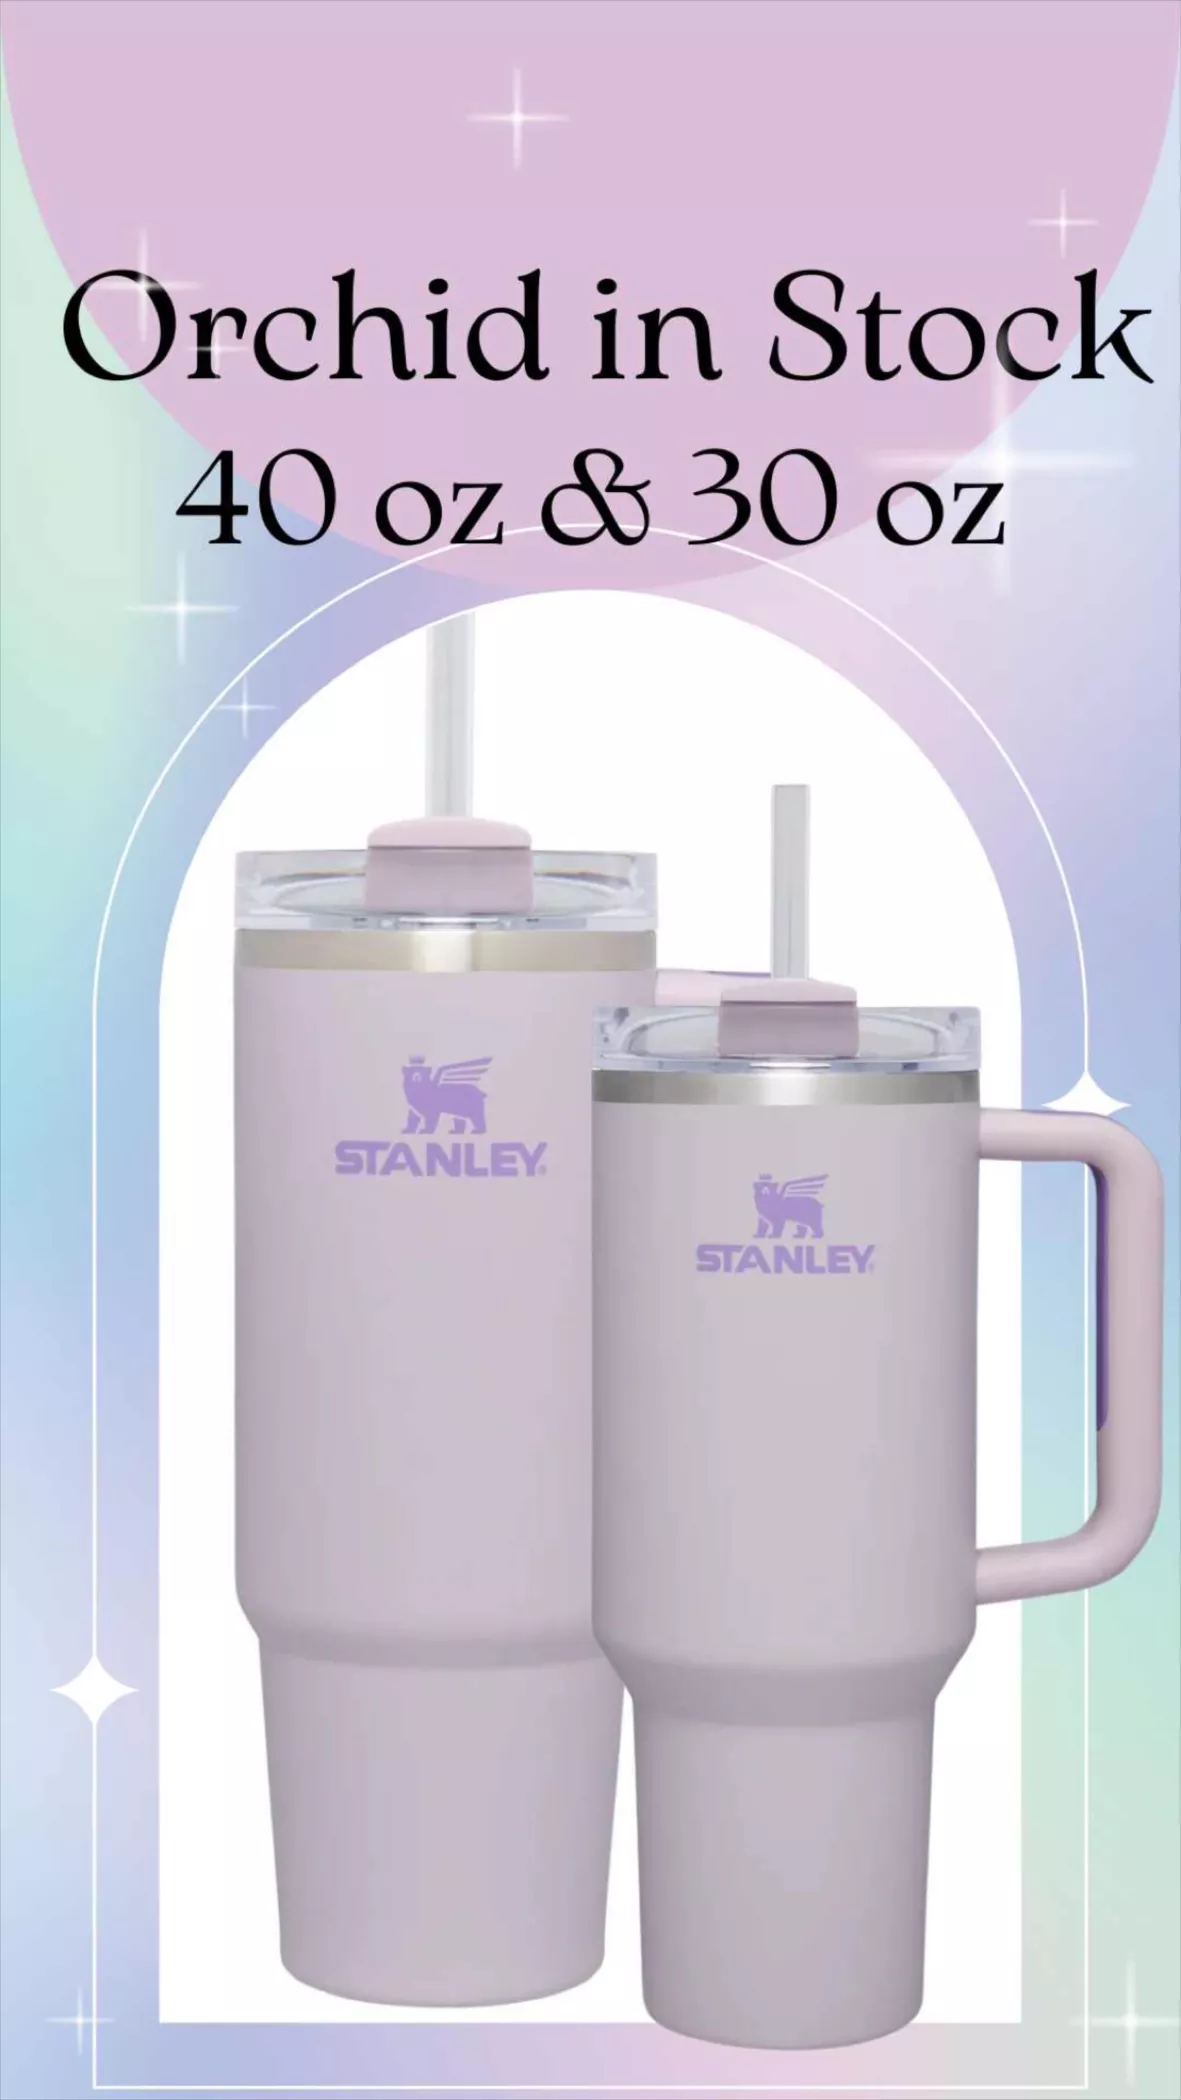 Stanley 30 oz Tumblr in Orchid